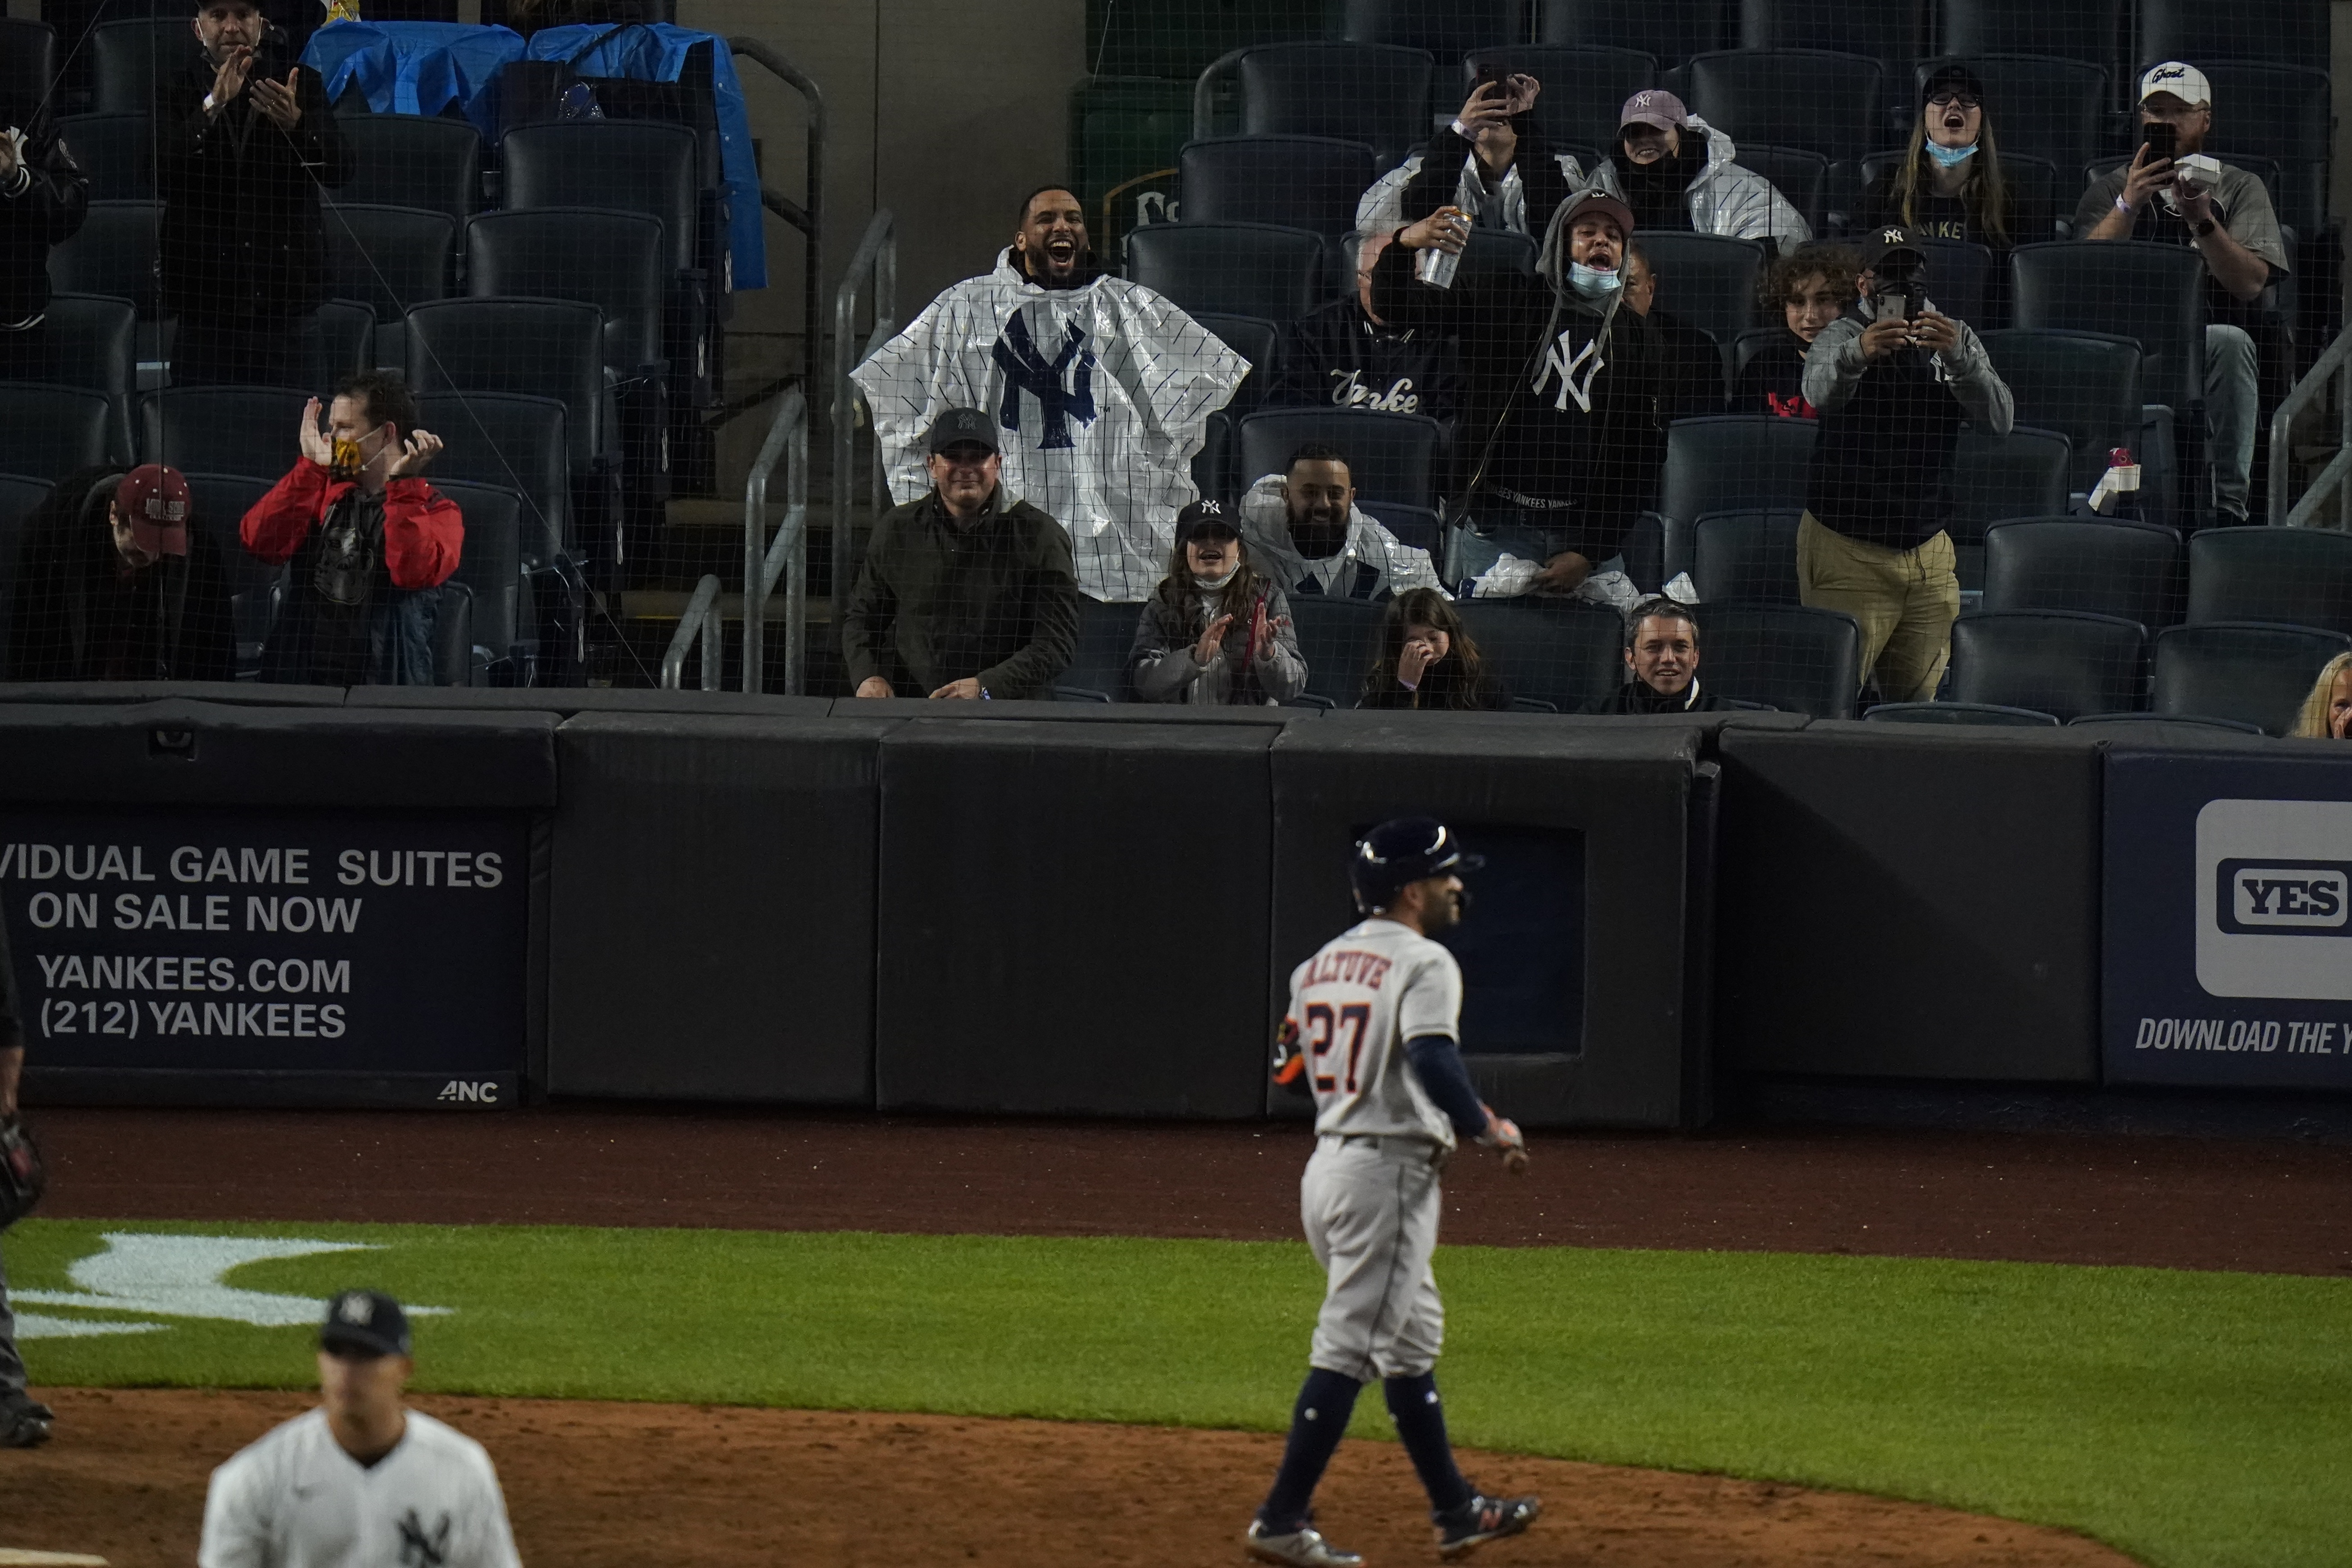 New York Yankees: Brainstorming punishments for the Houston Astros